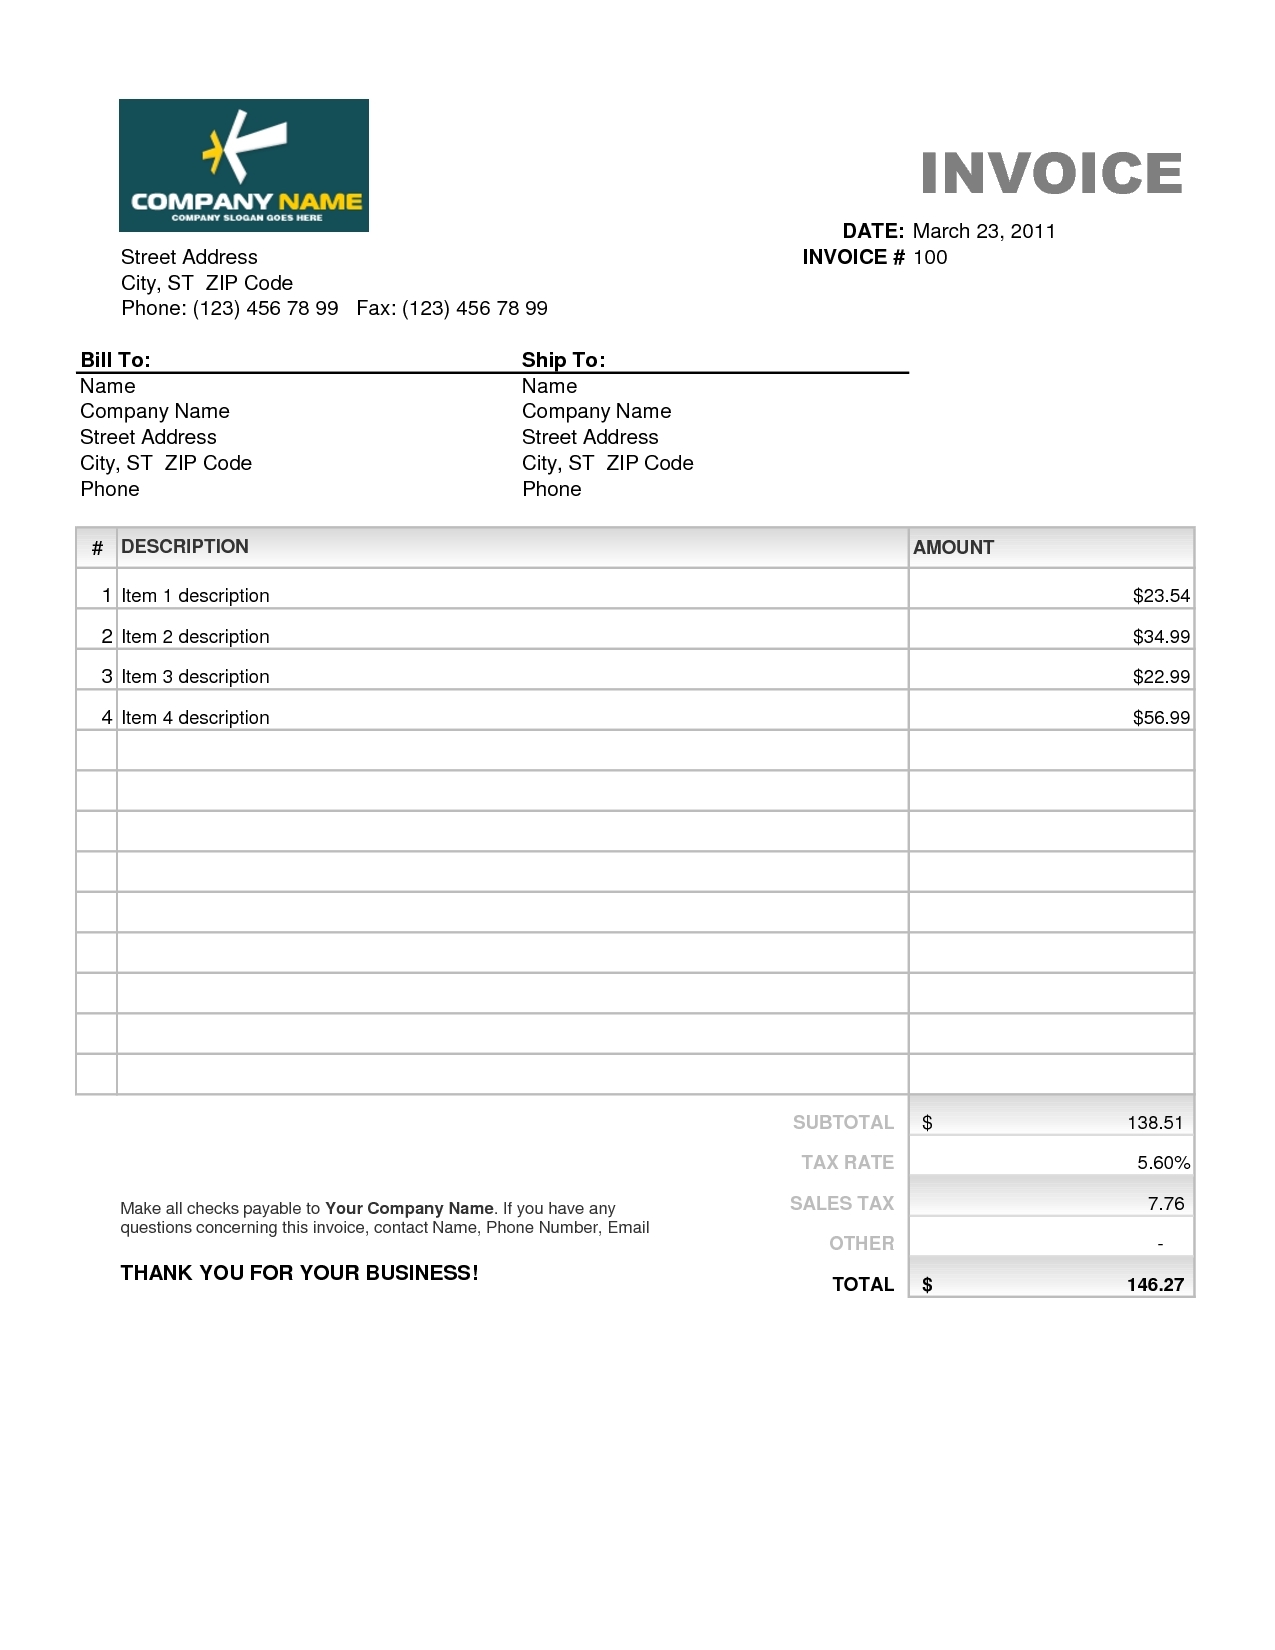 invoice format download invoice template free 2016 invoice format in excel download